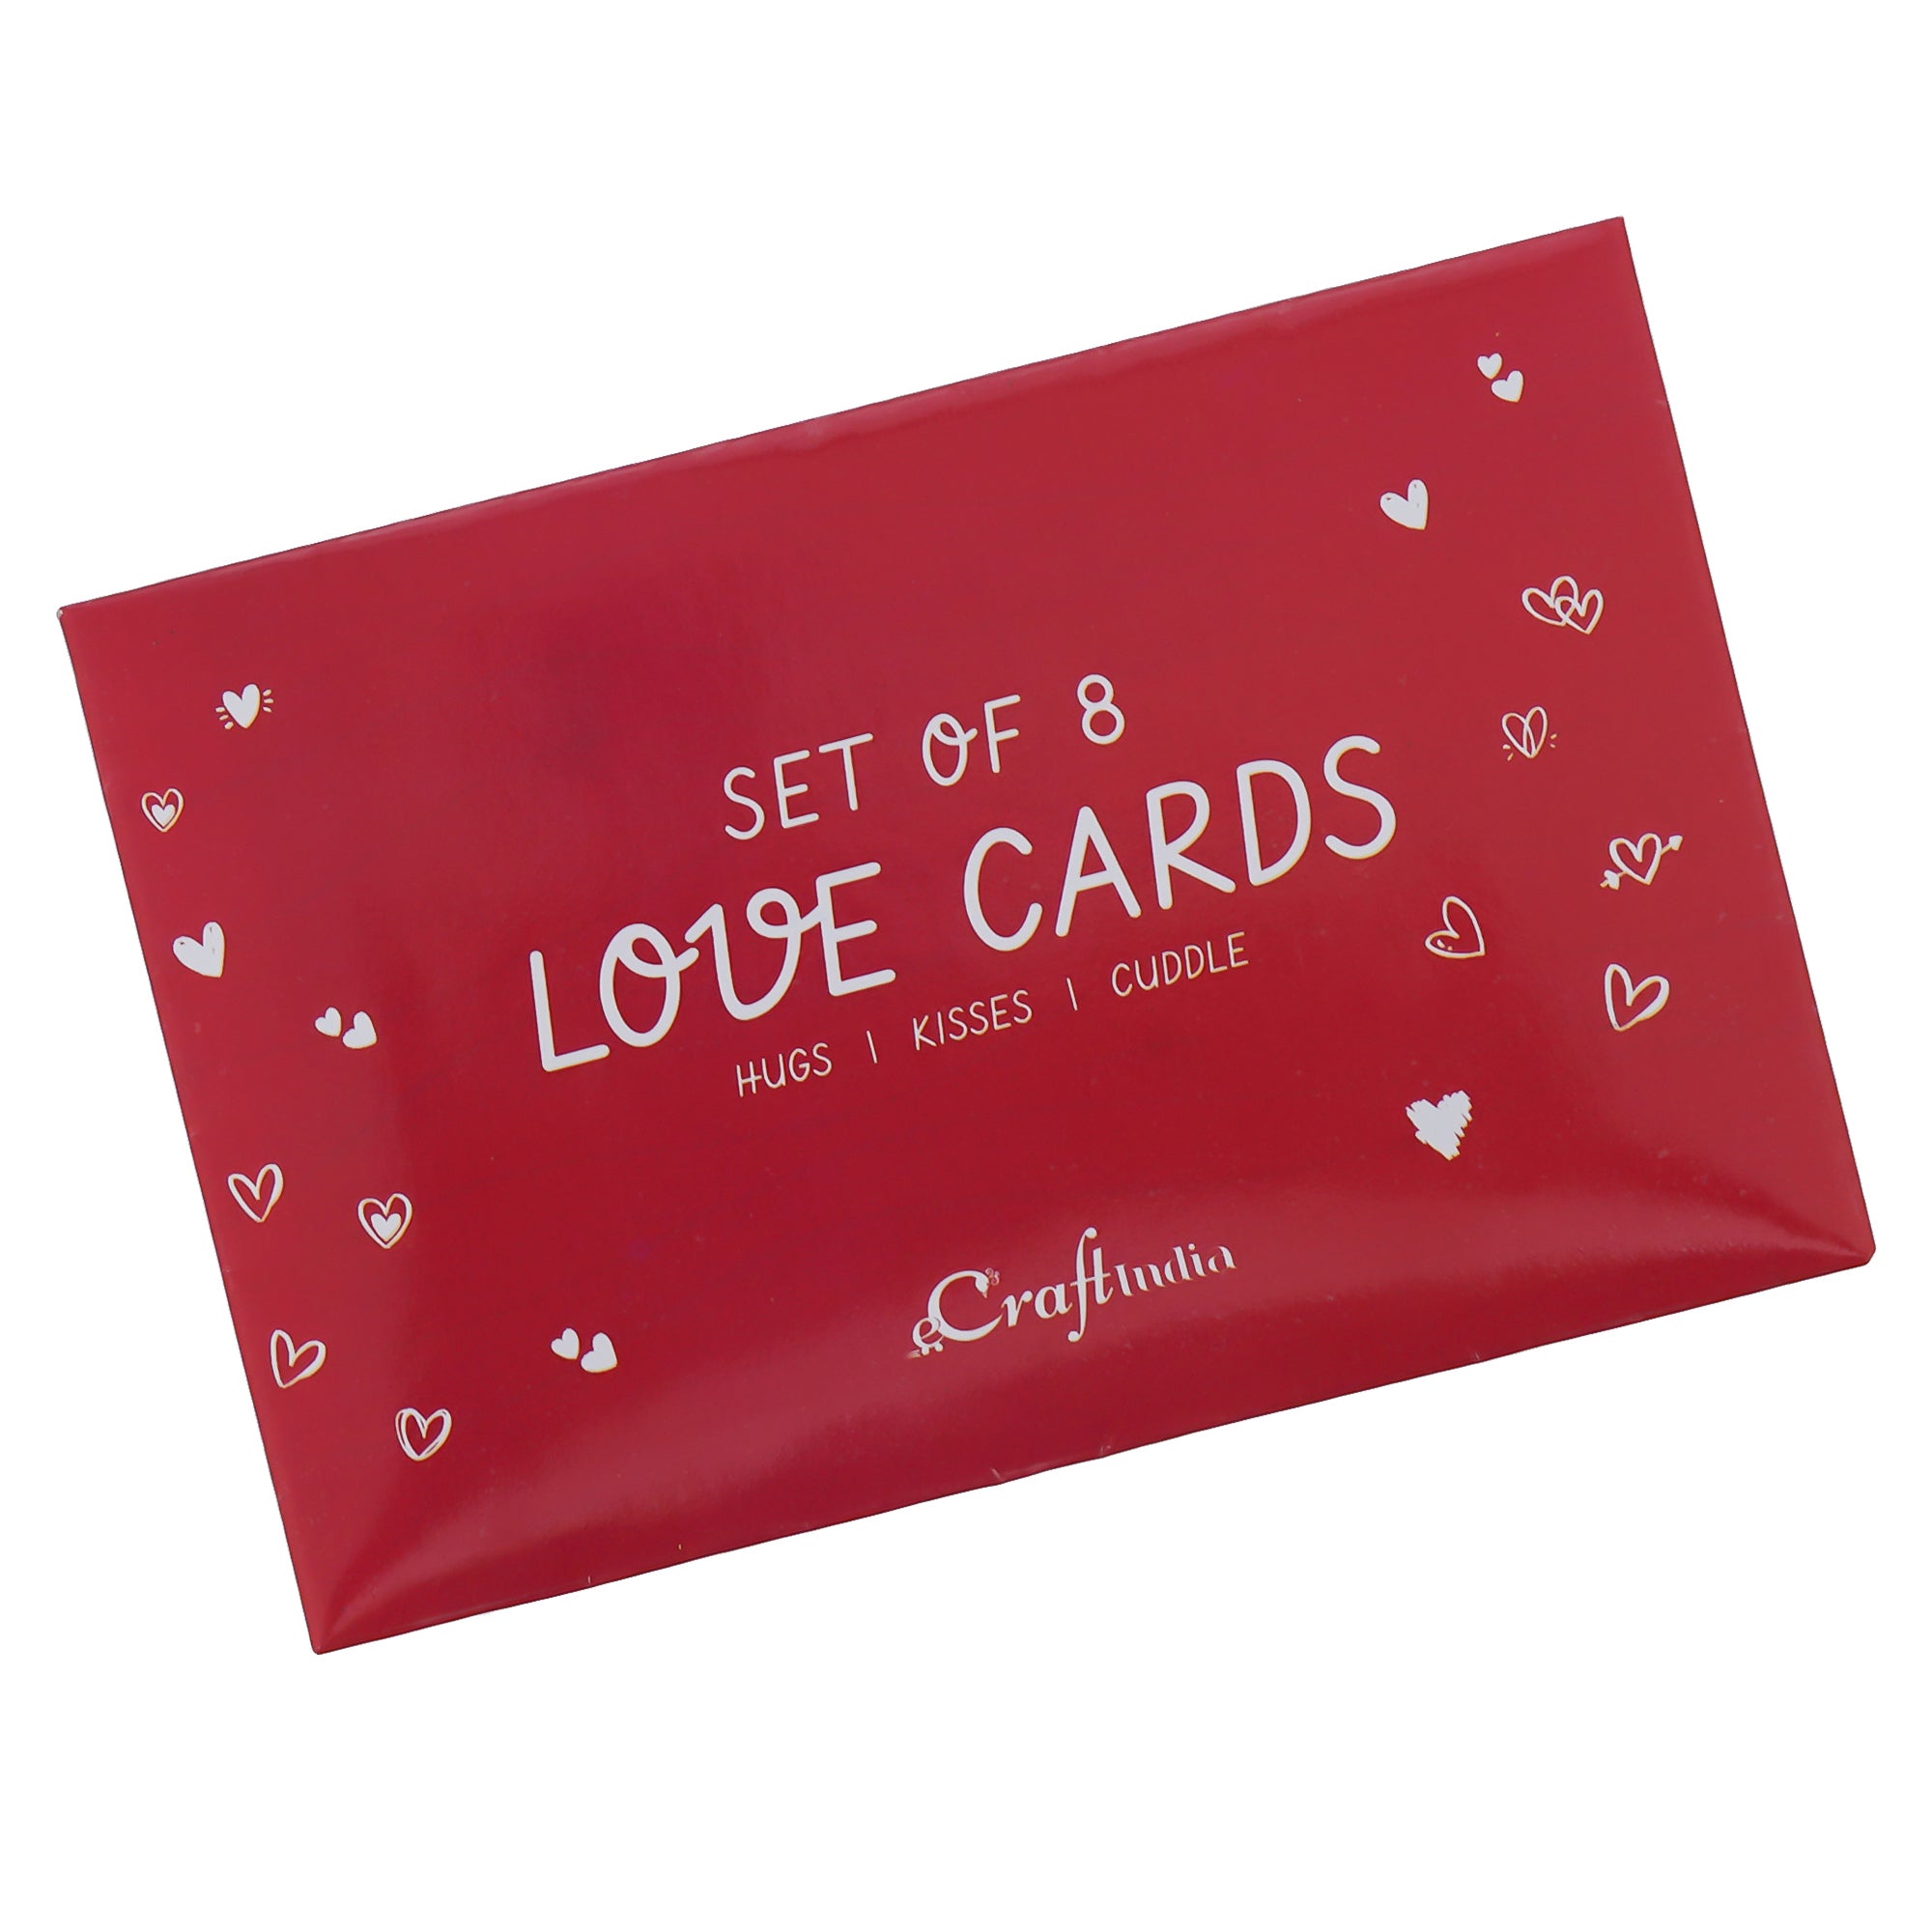 Valentine Combo of Pack of 8 Love Gift Cards, "20 Reasons Why I Love You" Printed on Little Hearts Wooden Gift Set, Red Roses Bouquet and White, Red Teddy Bear Valentine's Rectangle Shaped Gift Box 7